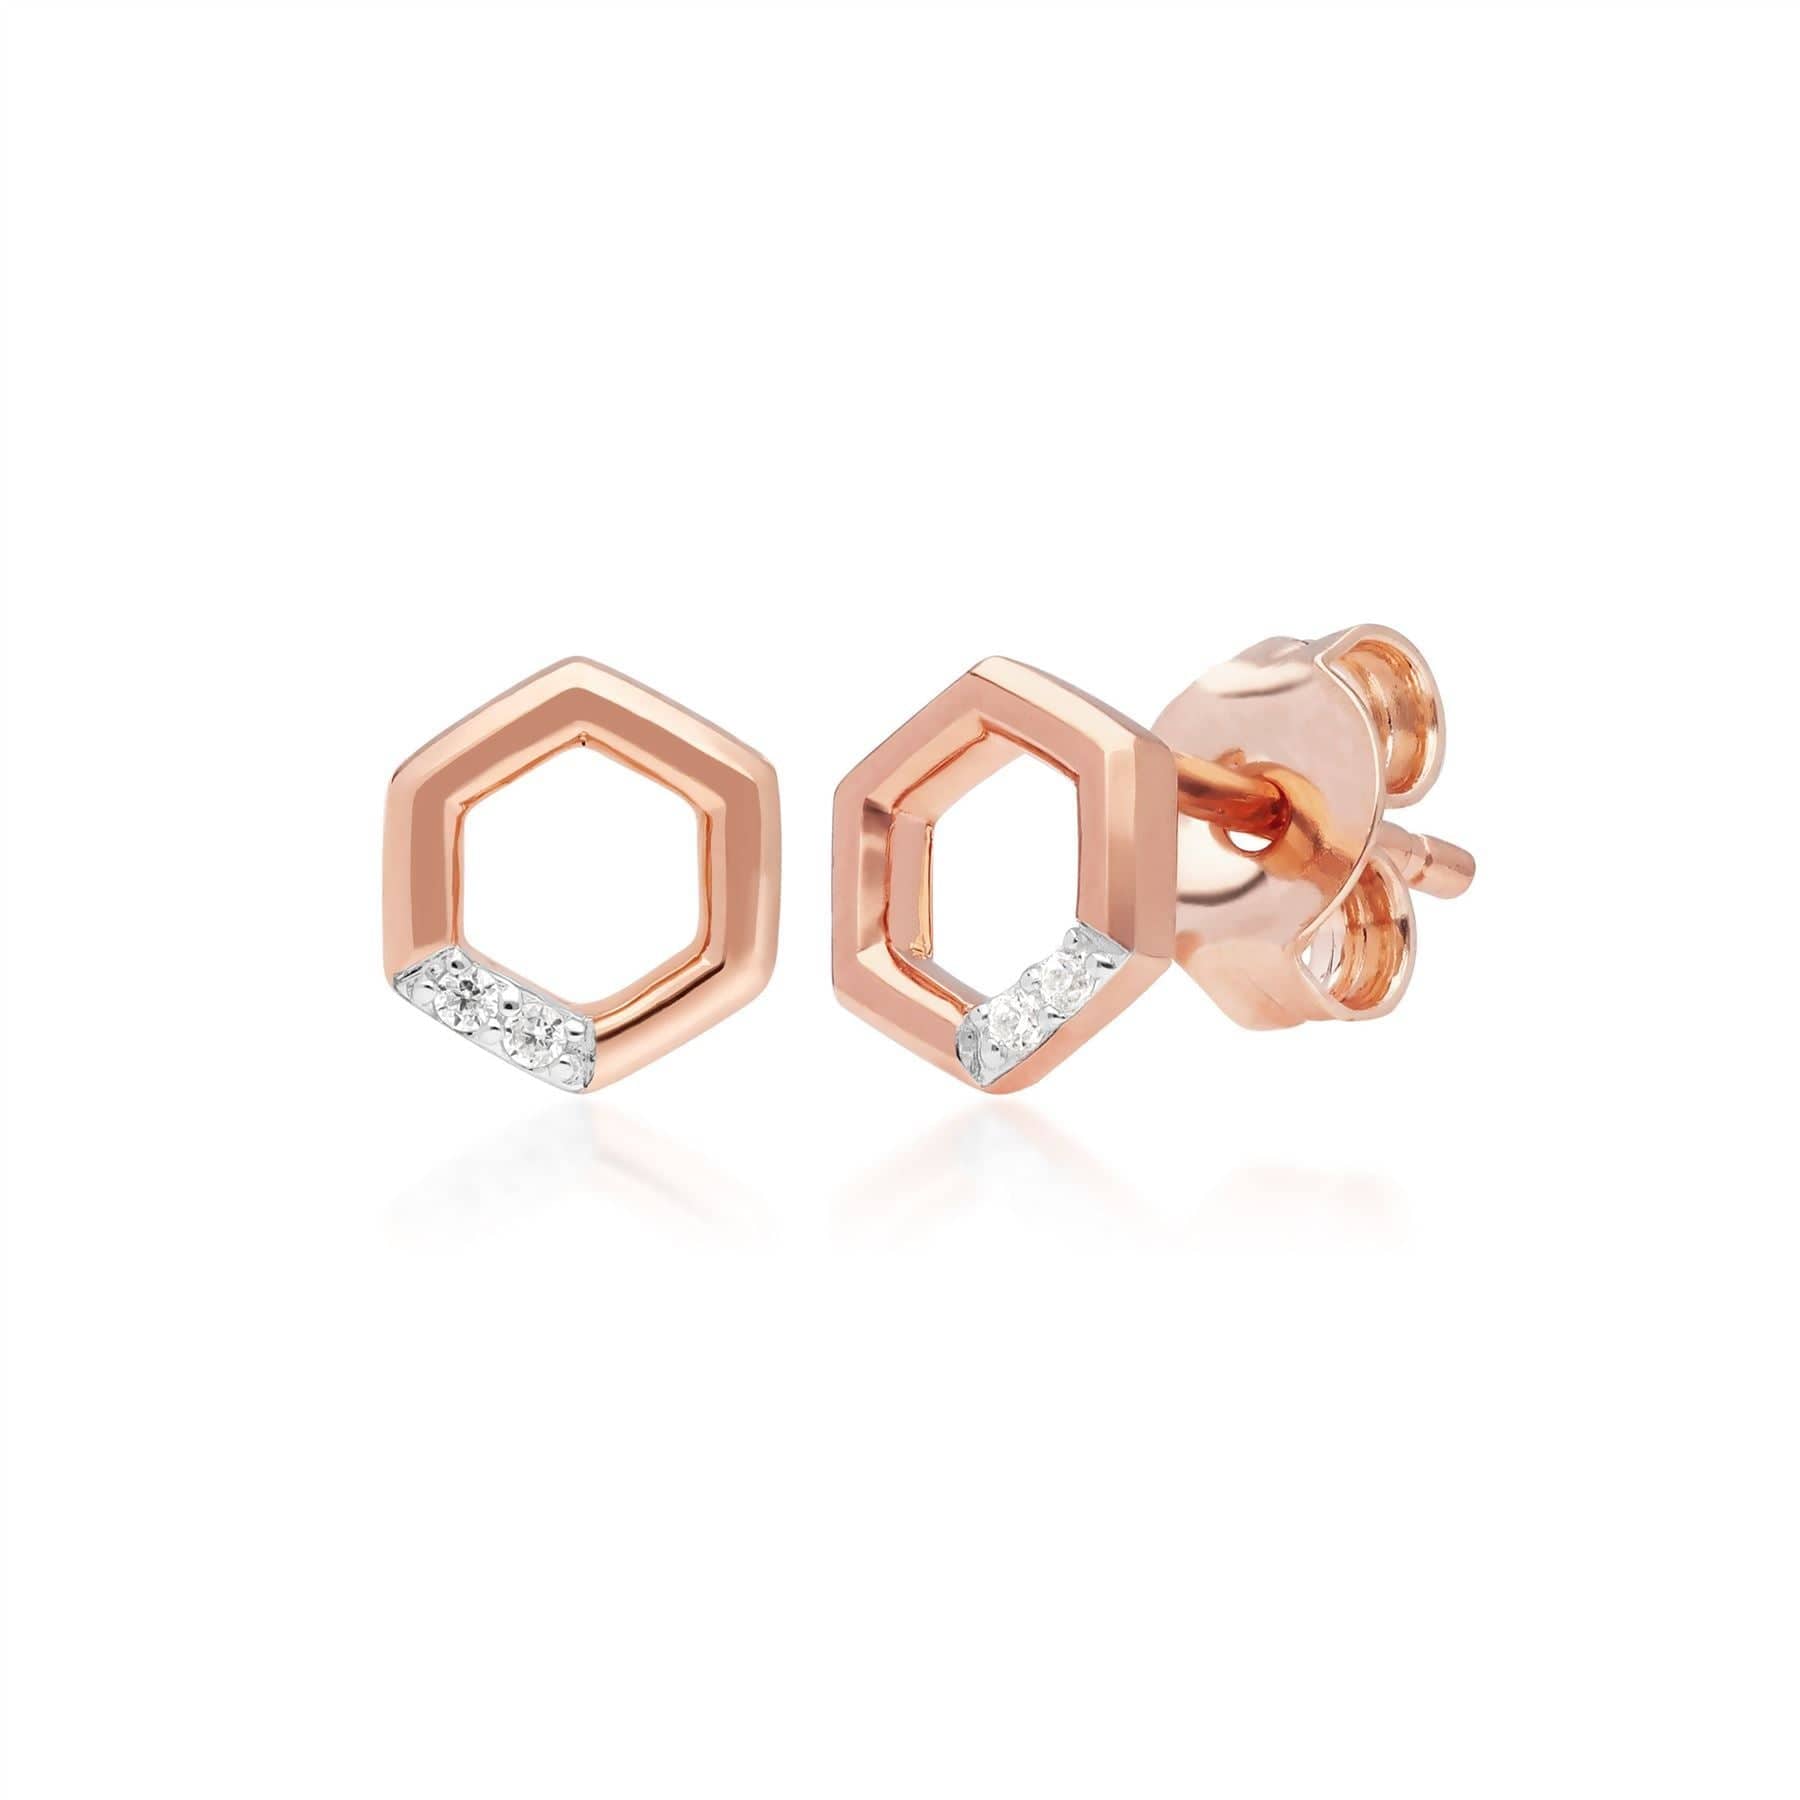 191E0400019-191R0906019 Diamond Pave Hexagon Stud Earring & Ring Set in 9ct Rose Gold 2